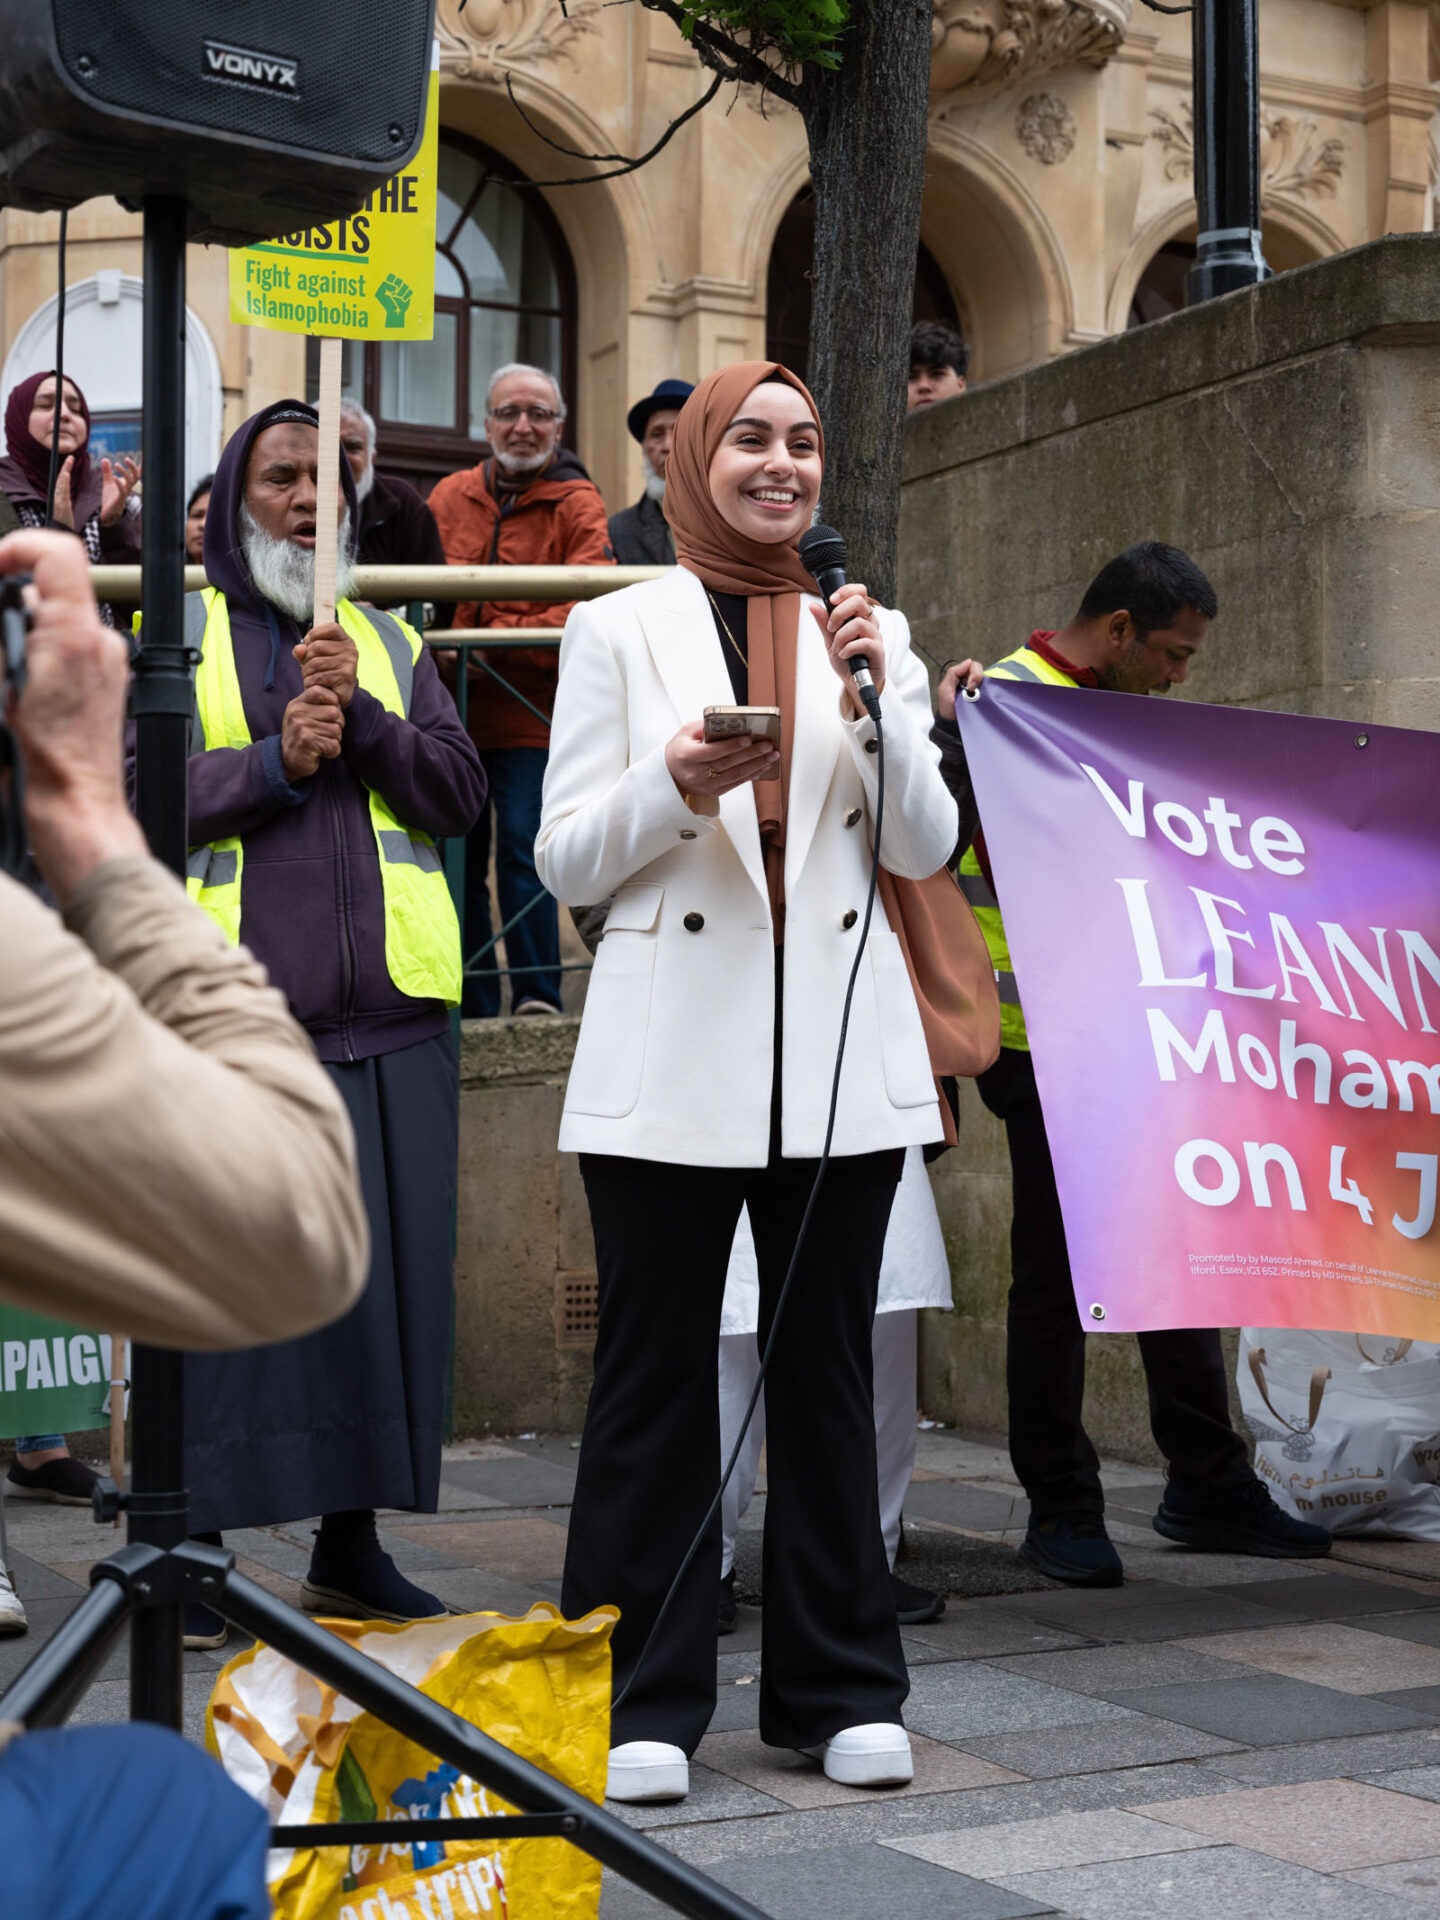 Independent candidate Leanne Mohamed — Gaza has been an awakening for a new wave of politics